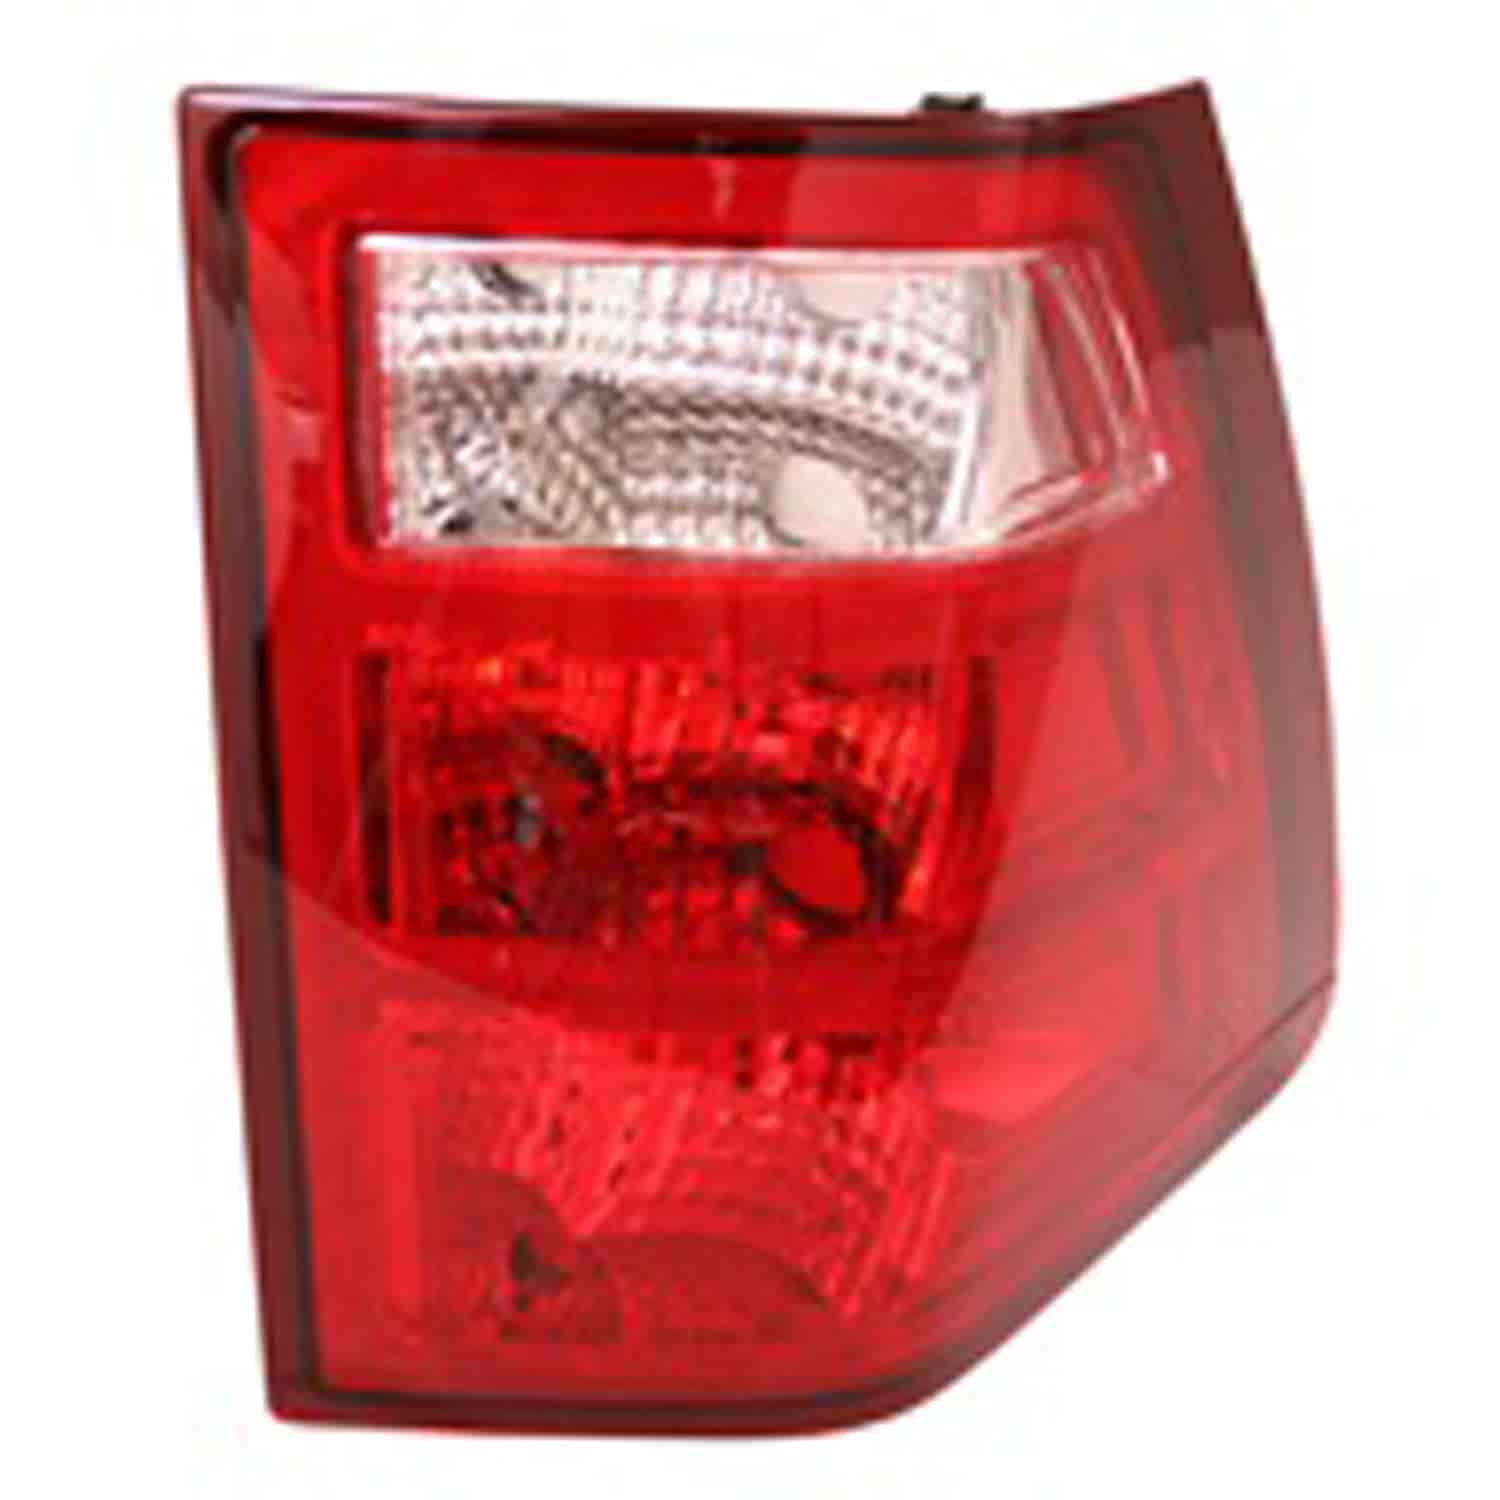 Replacement tail light assembly from Omix-ADA, Fits left side of 05-06 Jeep Grand Cherokee WK